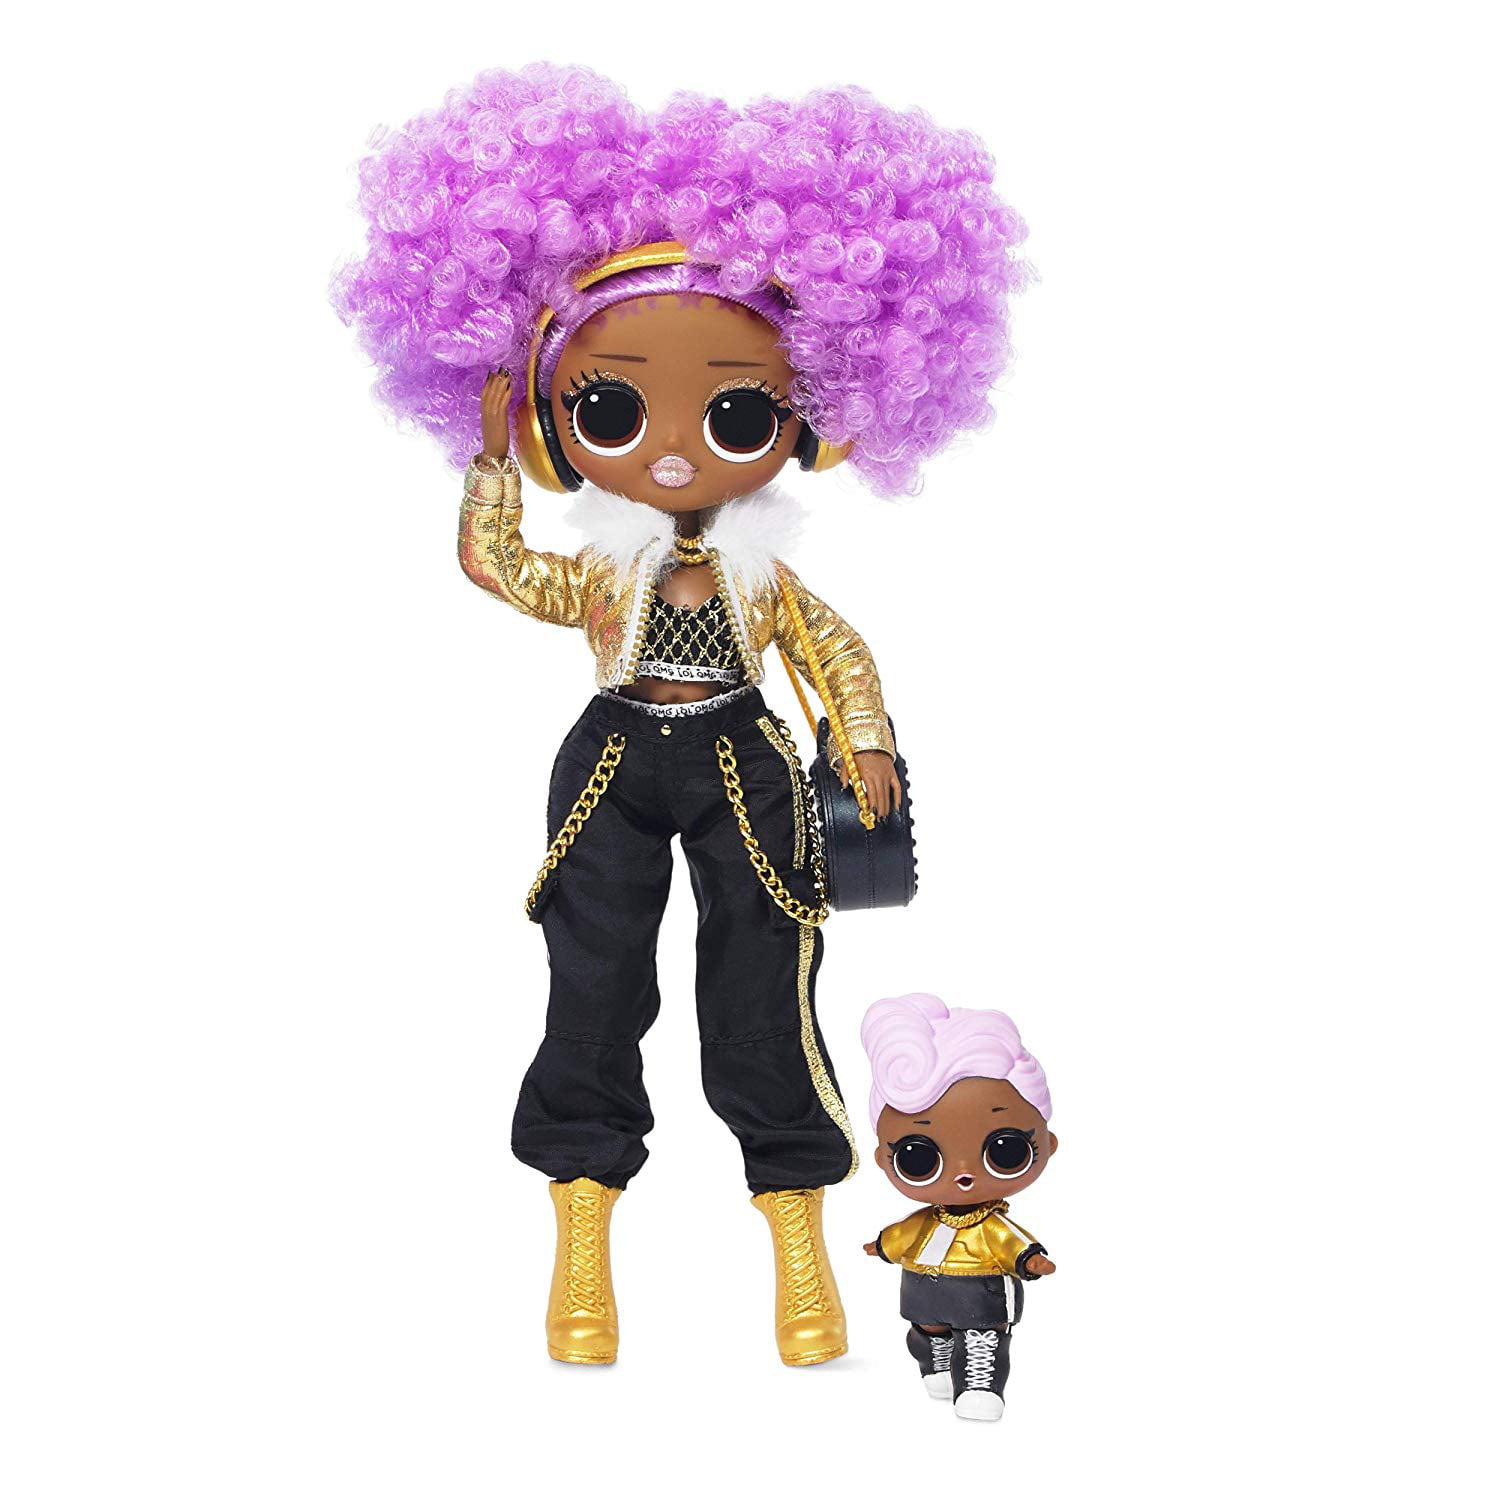 Real LOL Surprise Doll Midnight With LIL SISTER Confetti Pop Toys L.O.L.